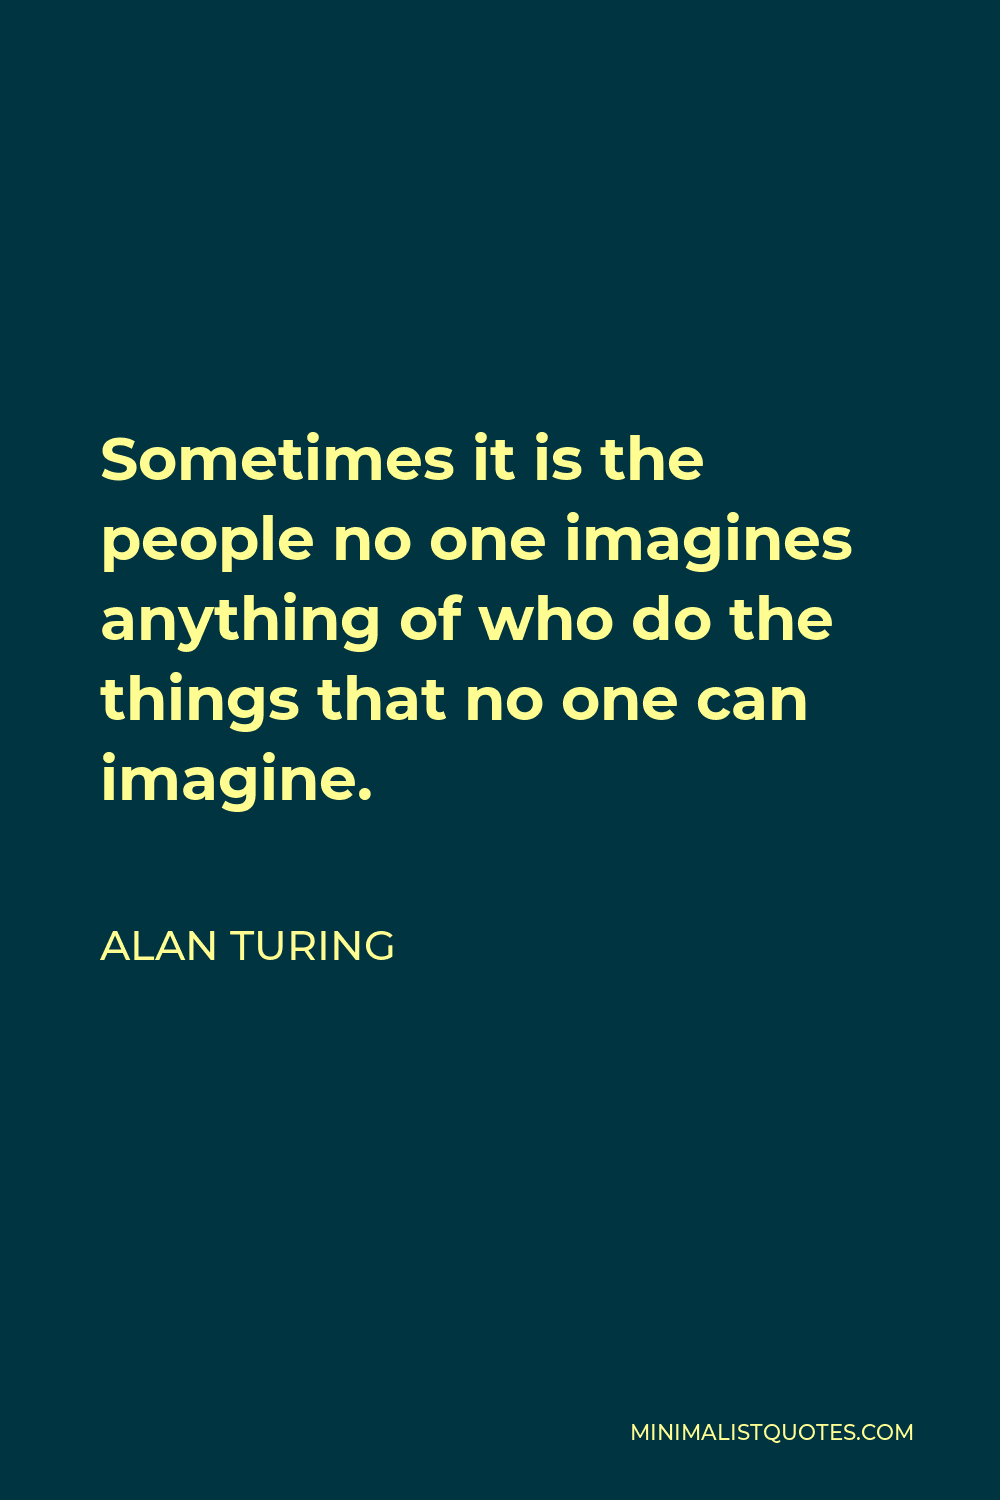 Alan Turing Quote - Sometimes it is the people no one imagines anything of who do the things that no one can imagine.